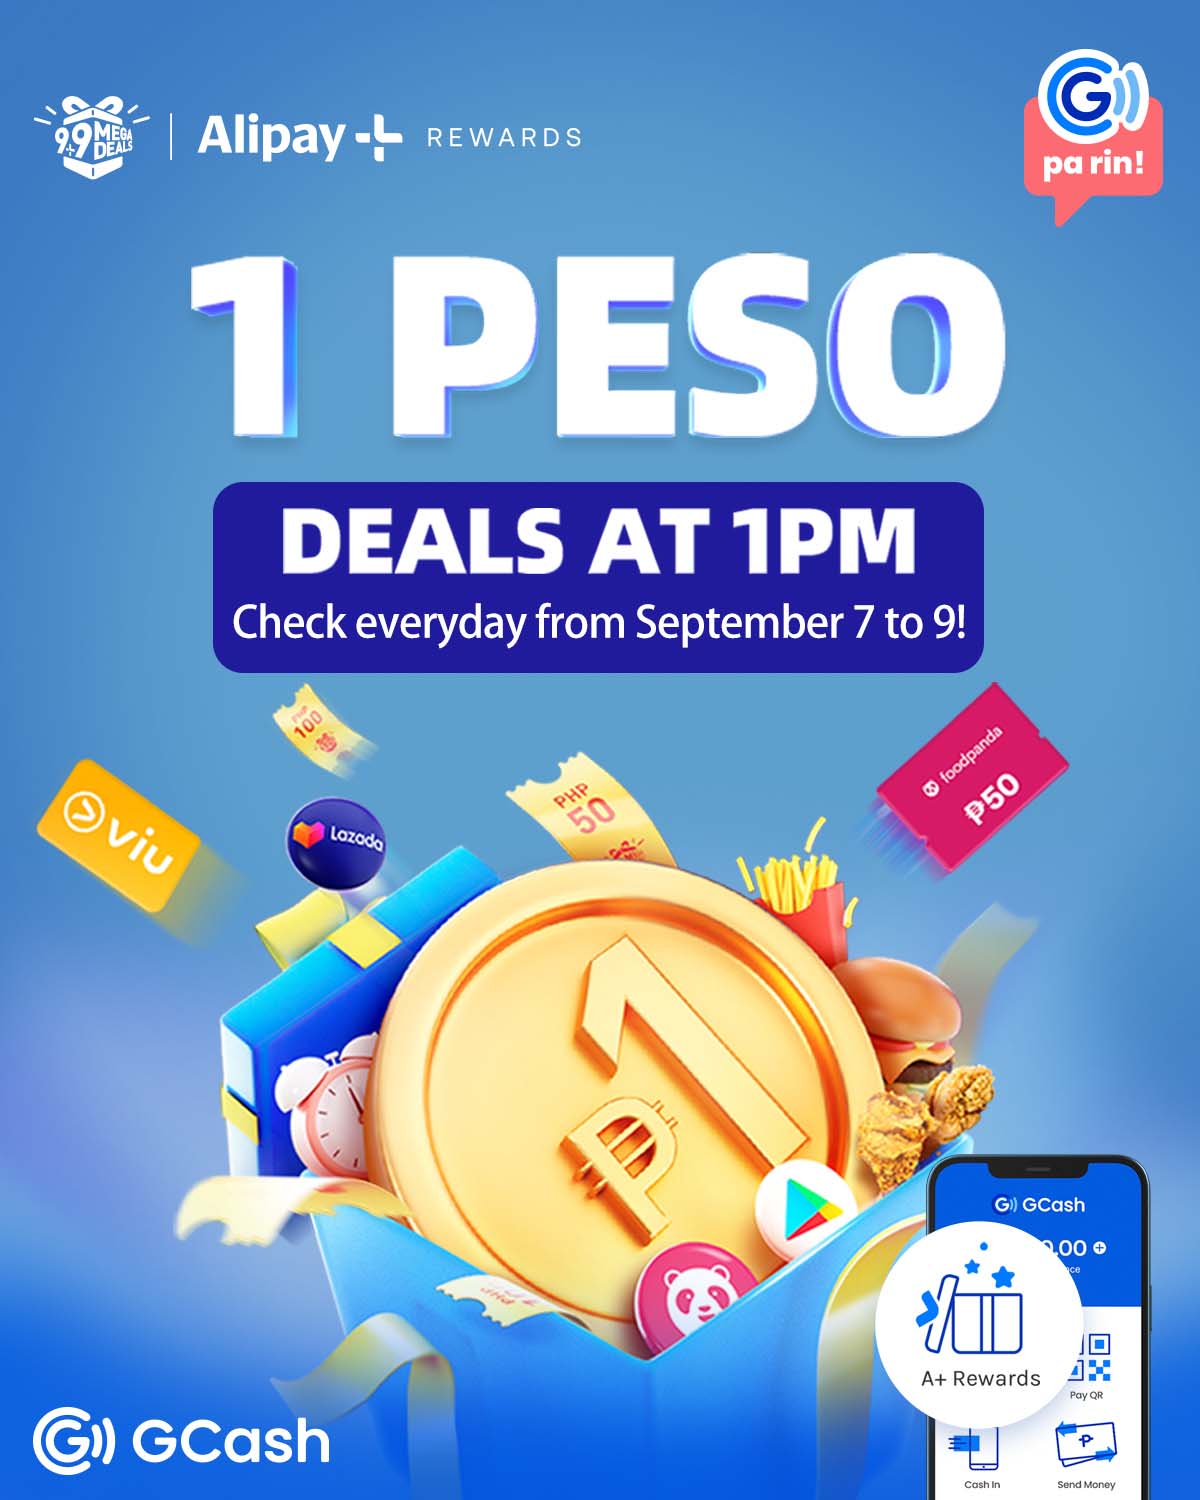 Enjoy up to 40% off when you use GCash this 9.9!